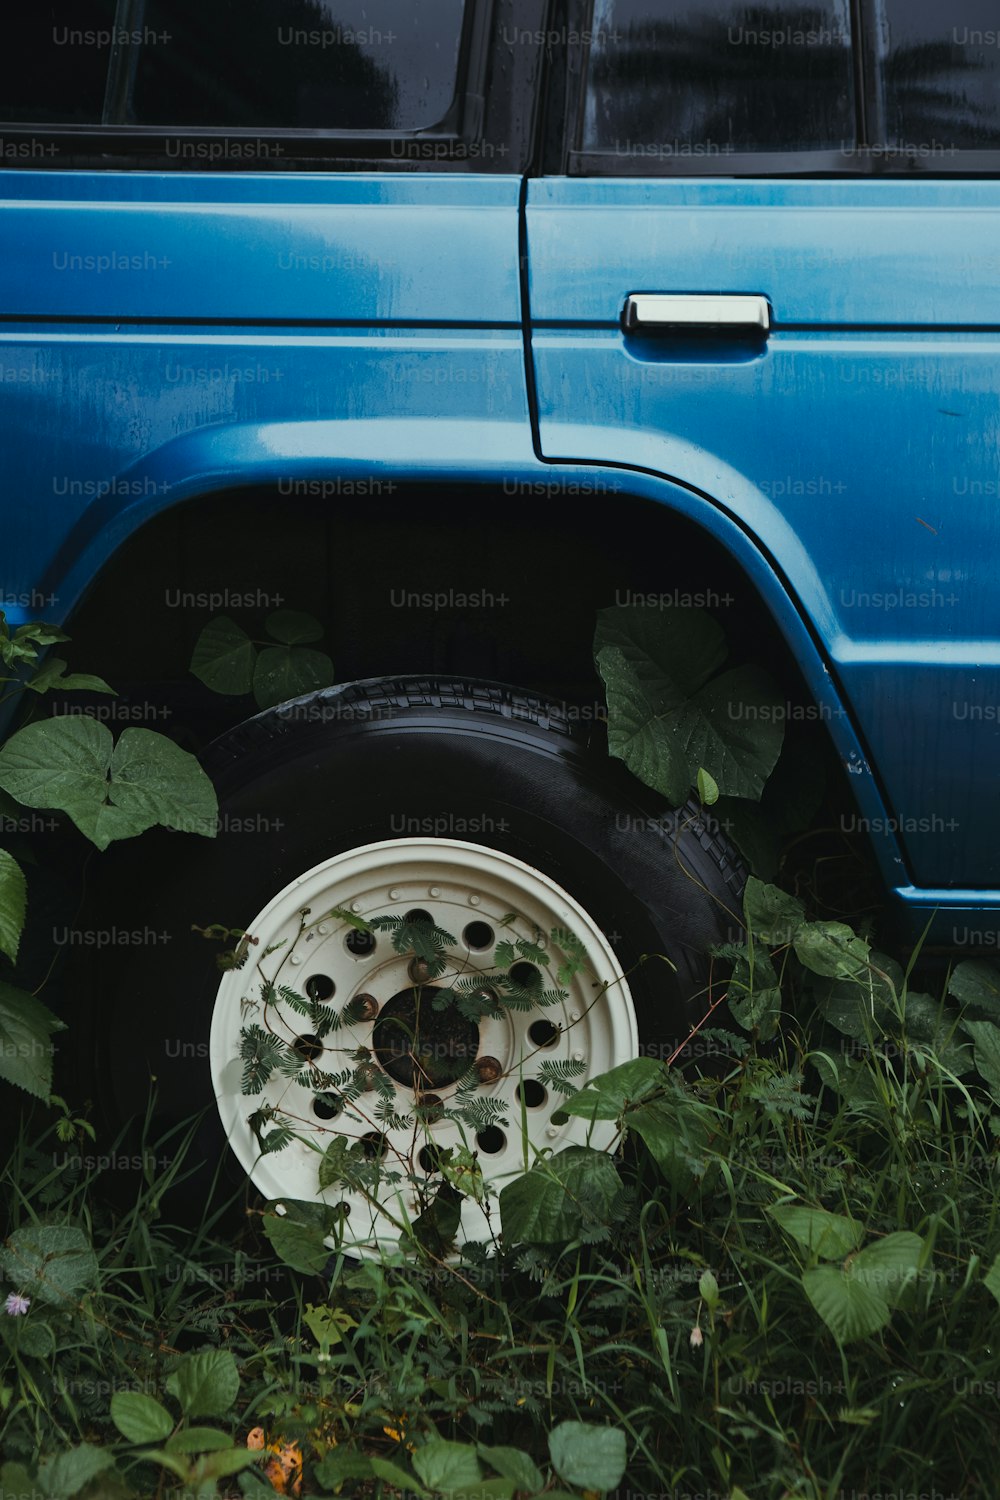 a blue van parked in the grass with a tire